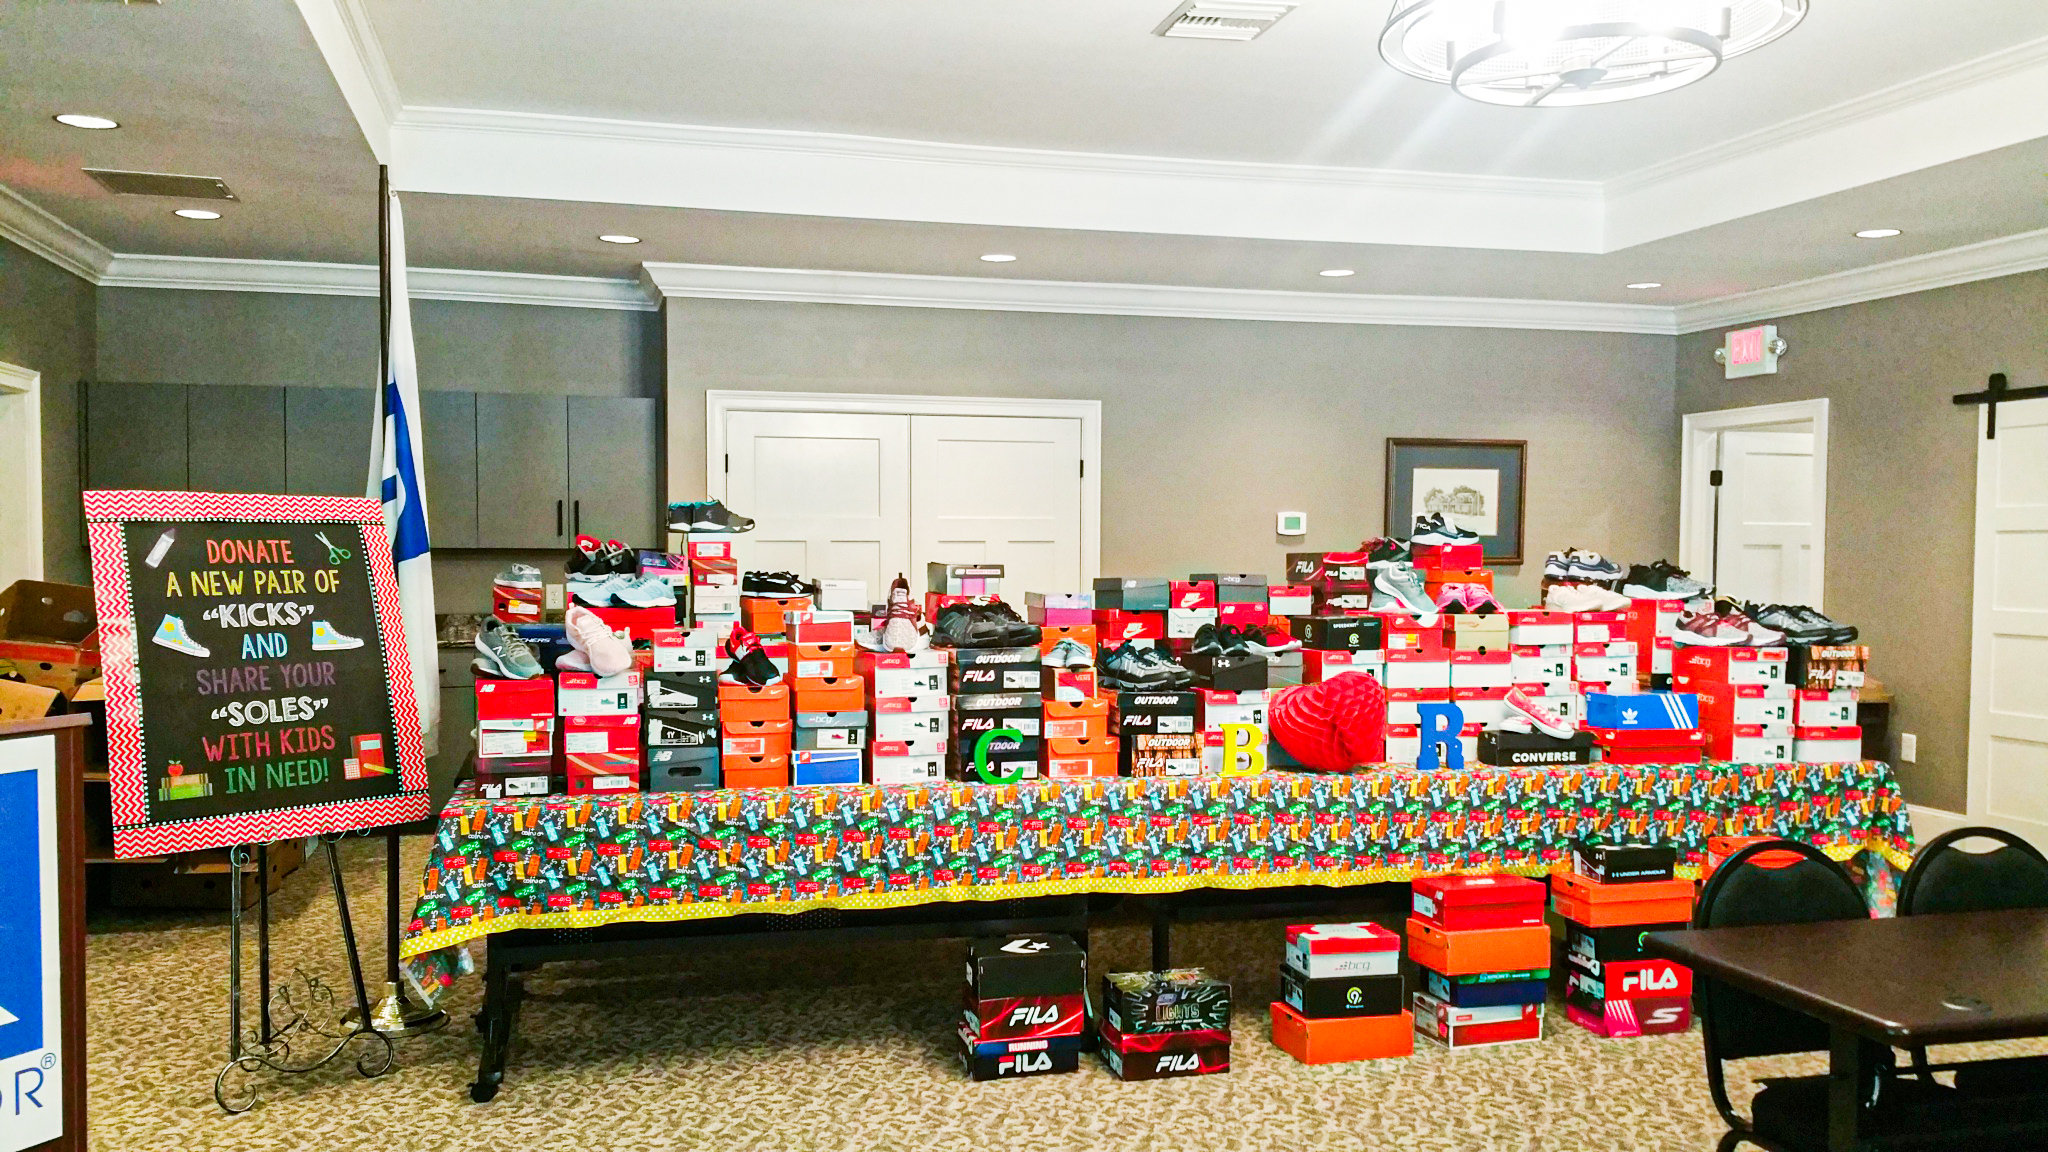 Give A Kid A Chance, 260 pair of shoes donated